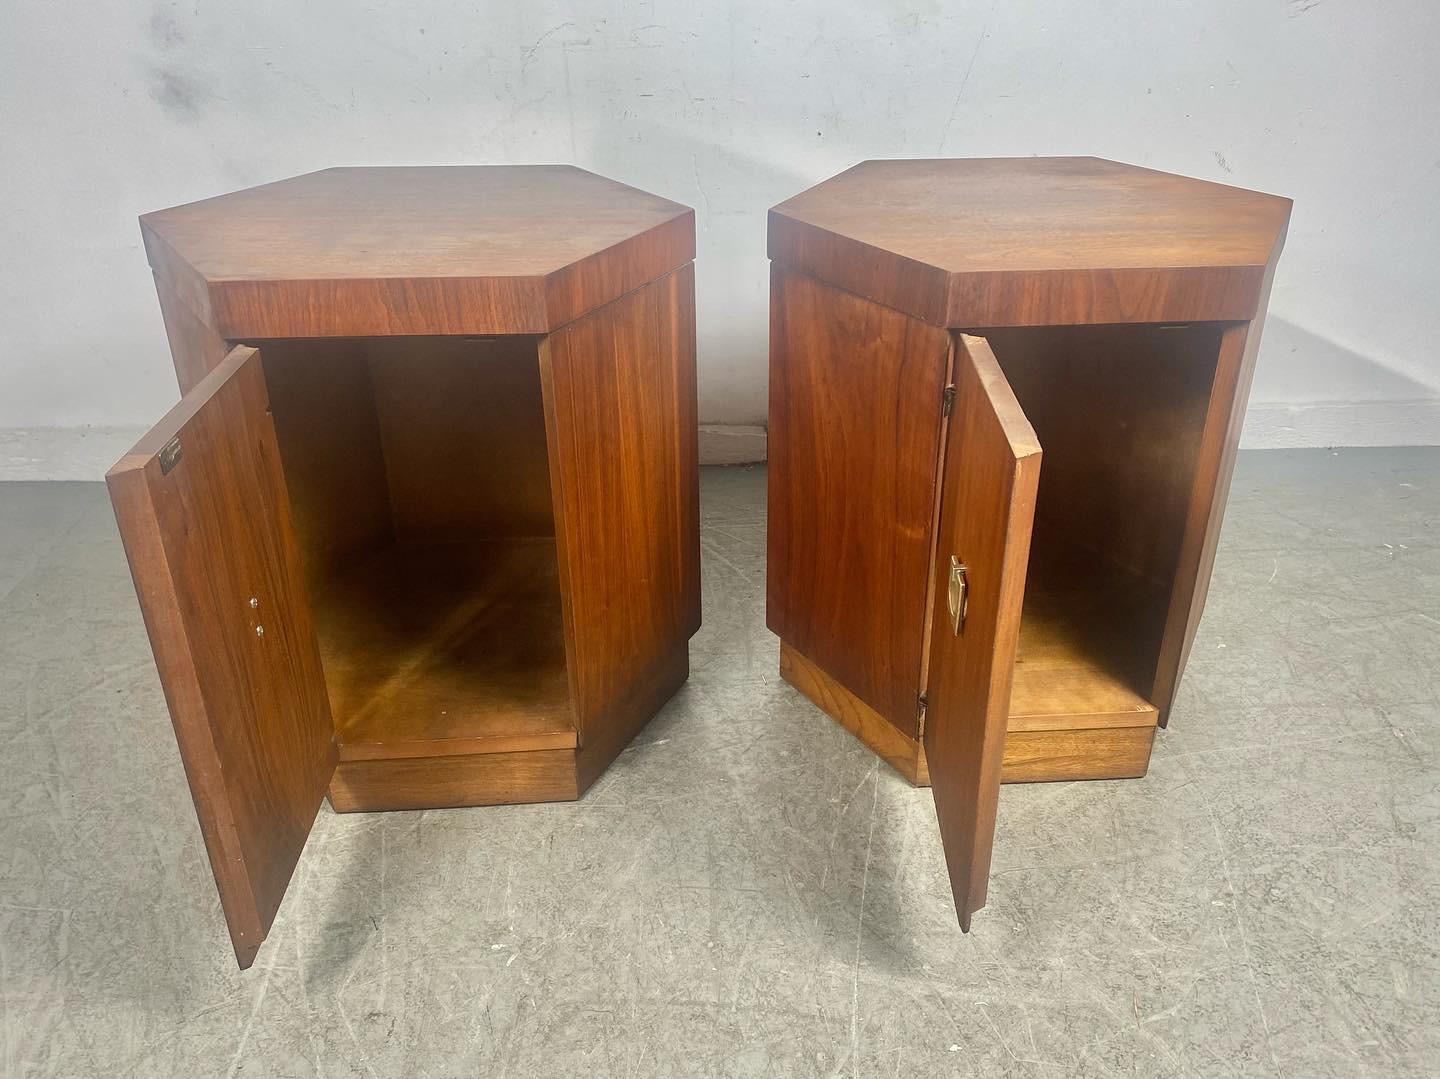 Mid-20th Century Stunning Pair Hexagon Tables / Stands, , Harvey Probber Style made by Lane For Sale